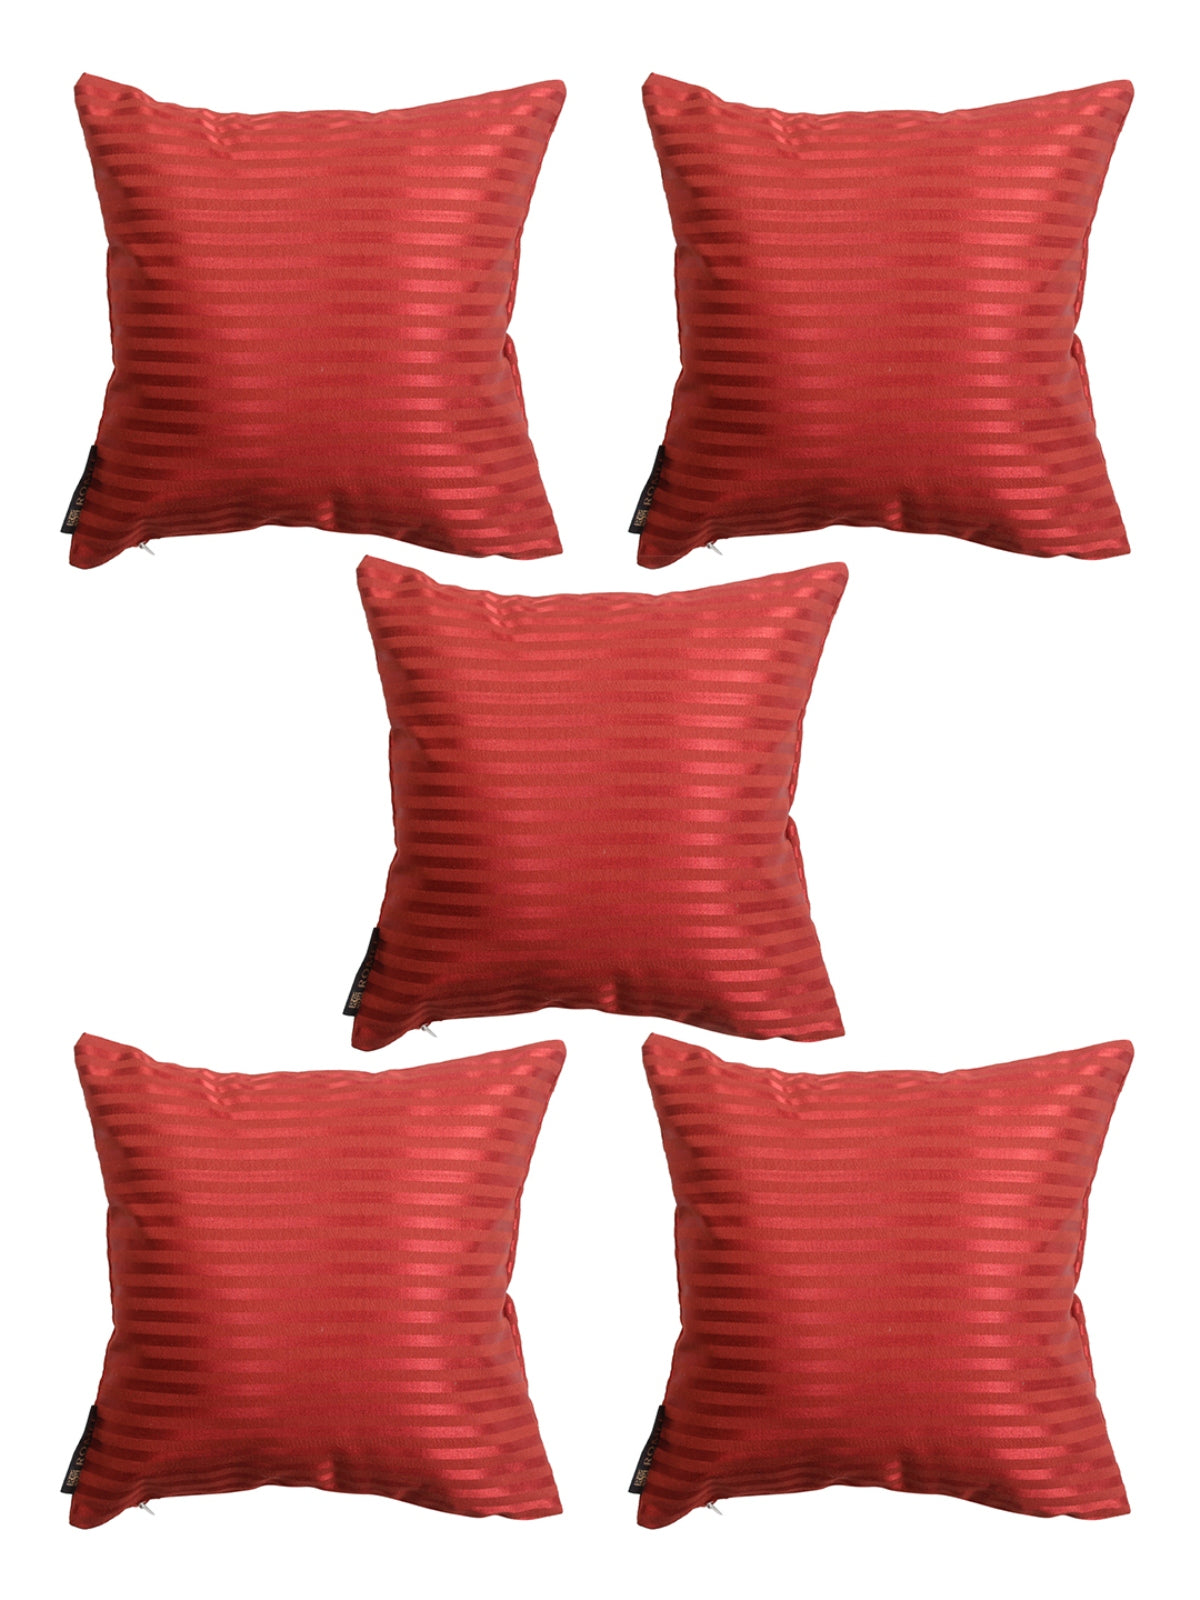 ROMEE Red Solid Printed Cushion Covers Set of 5